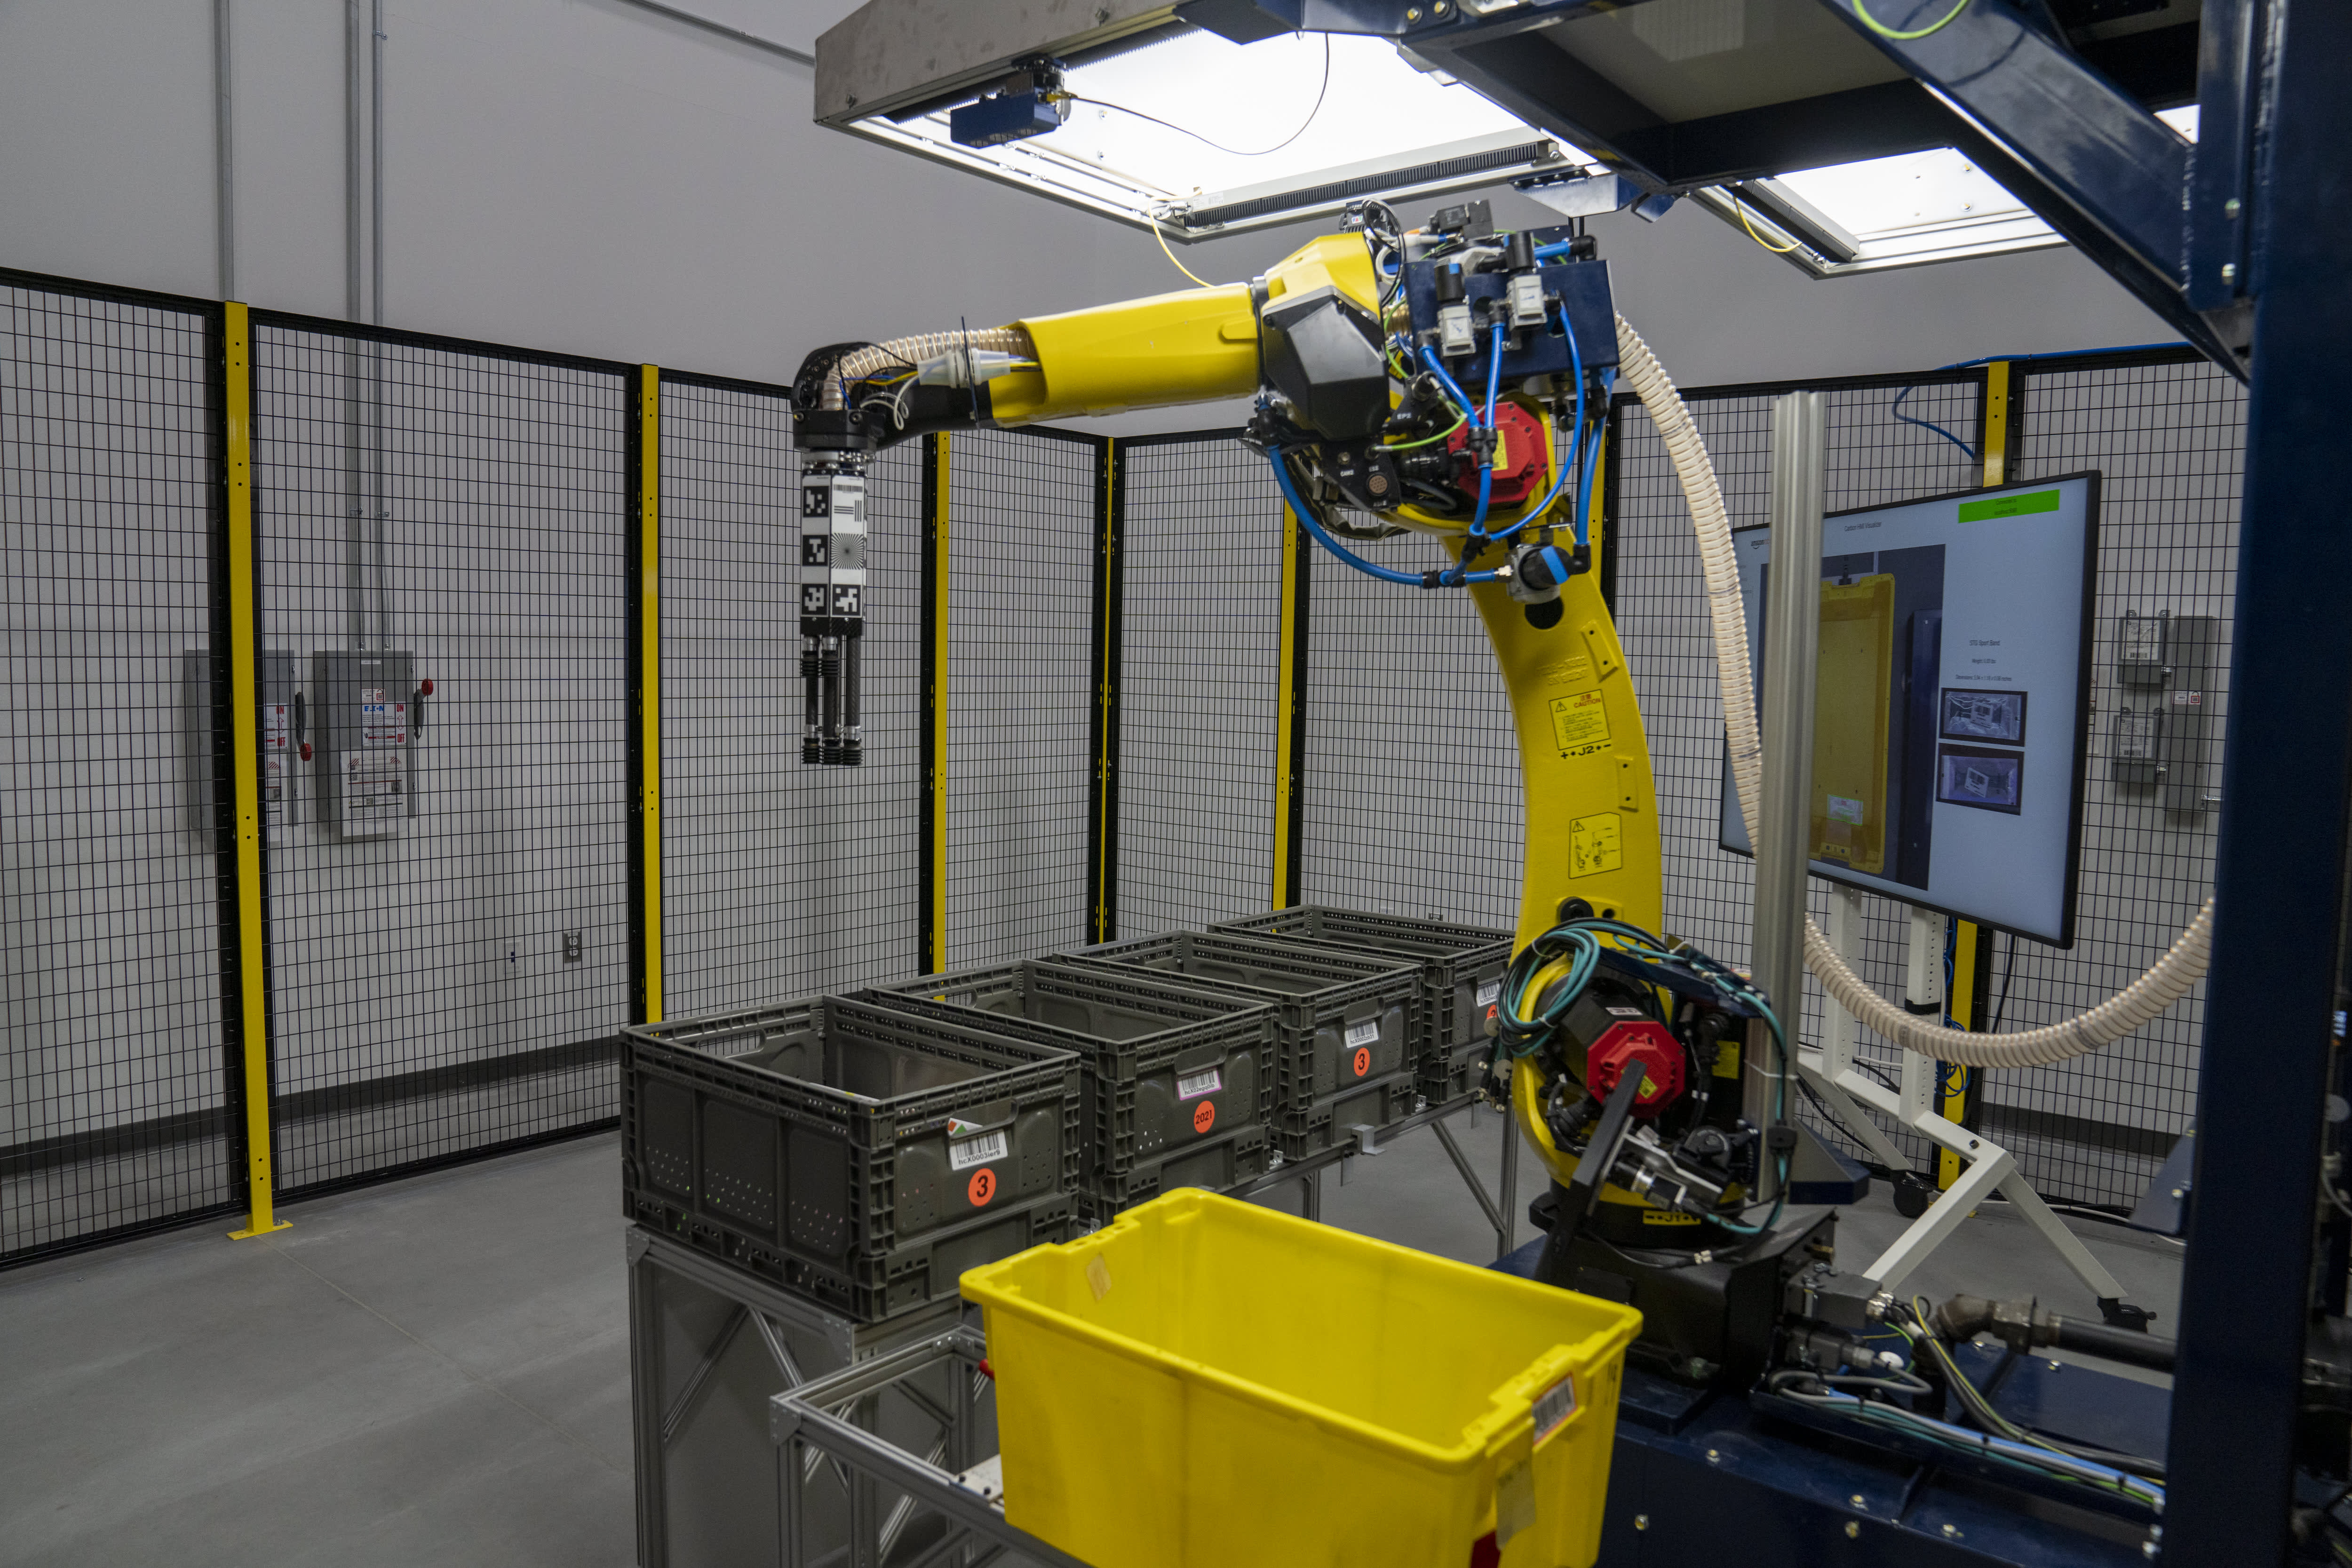 ophobe system Synes Amazon introduces robotic arm that can do repetitive warehouse tasks